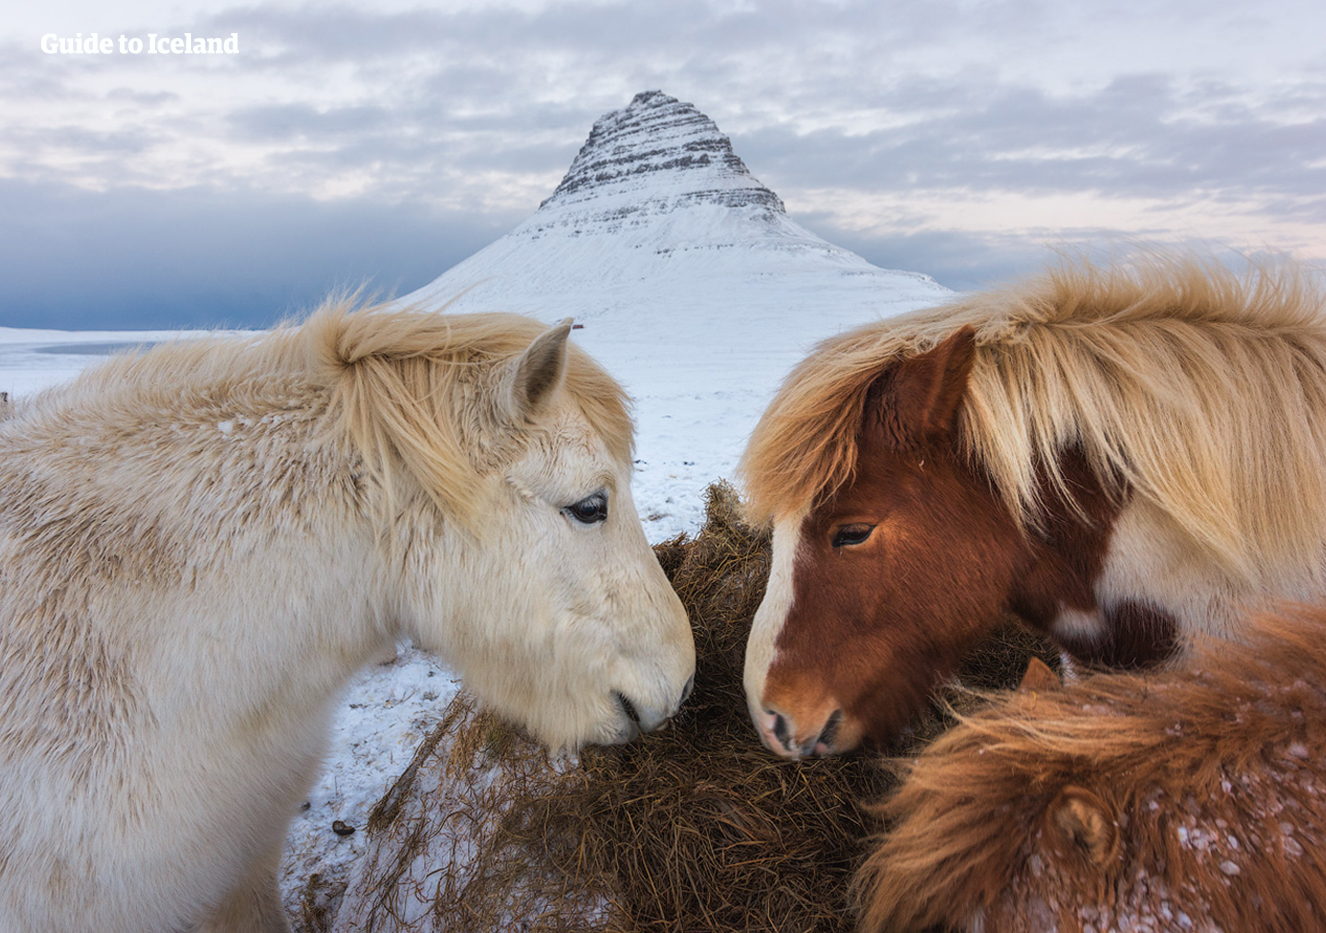 Snaefellsnes has a lot of offer, including the famous Kirkjufell mountain, often seen with roaming Icelandic horses around.